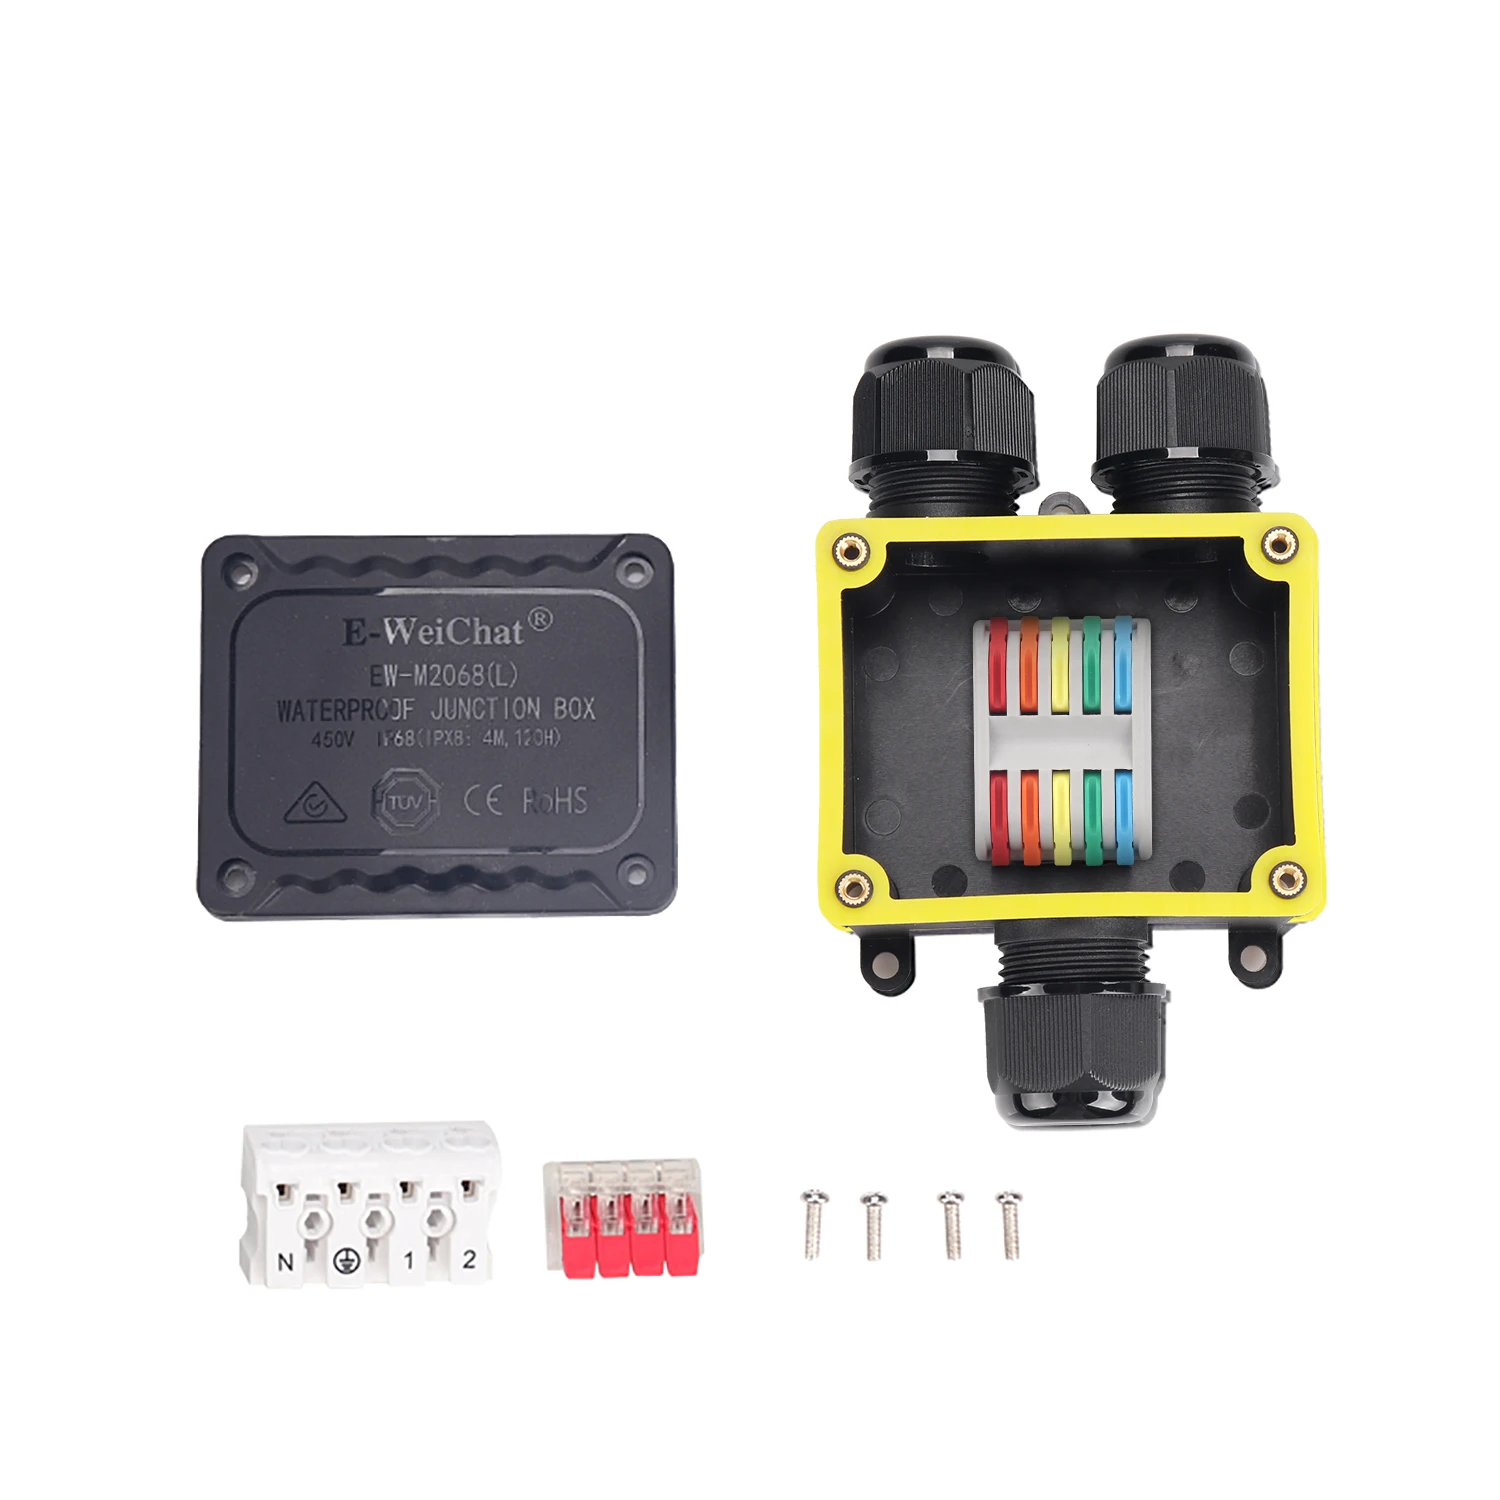 

Outdoor Underground Plastic Nylon Electrical Power Cable Enclosure Waterproof IP68 3 Way Junction Box